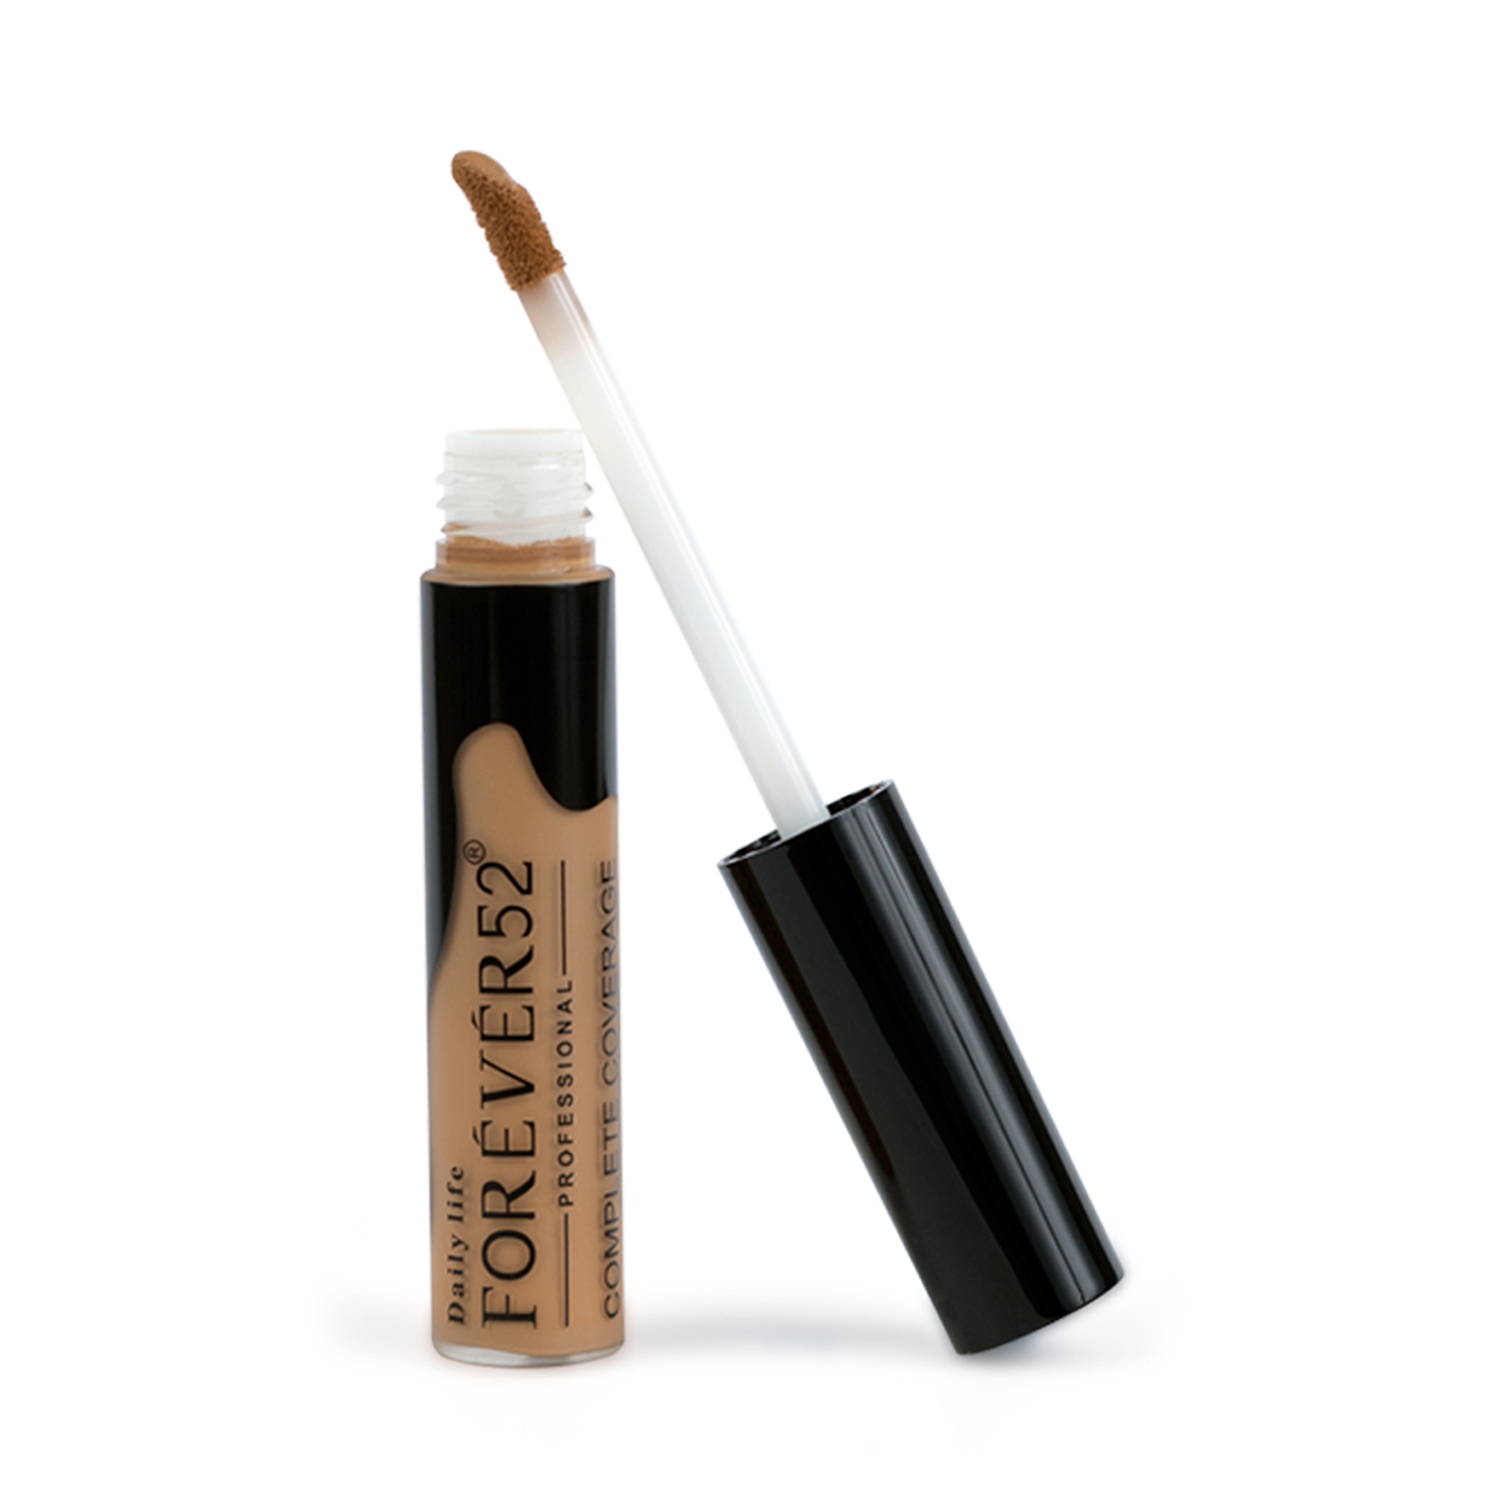 Daily Life Forever52 | Daily Life Forever52 Complete Coverage Concealer COV009 - Brever (10g)